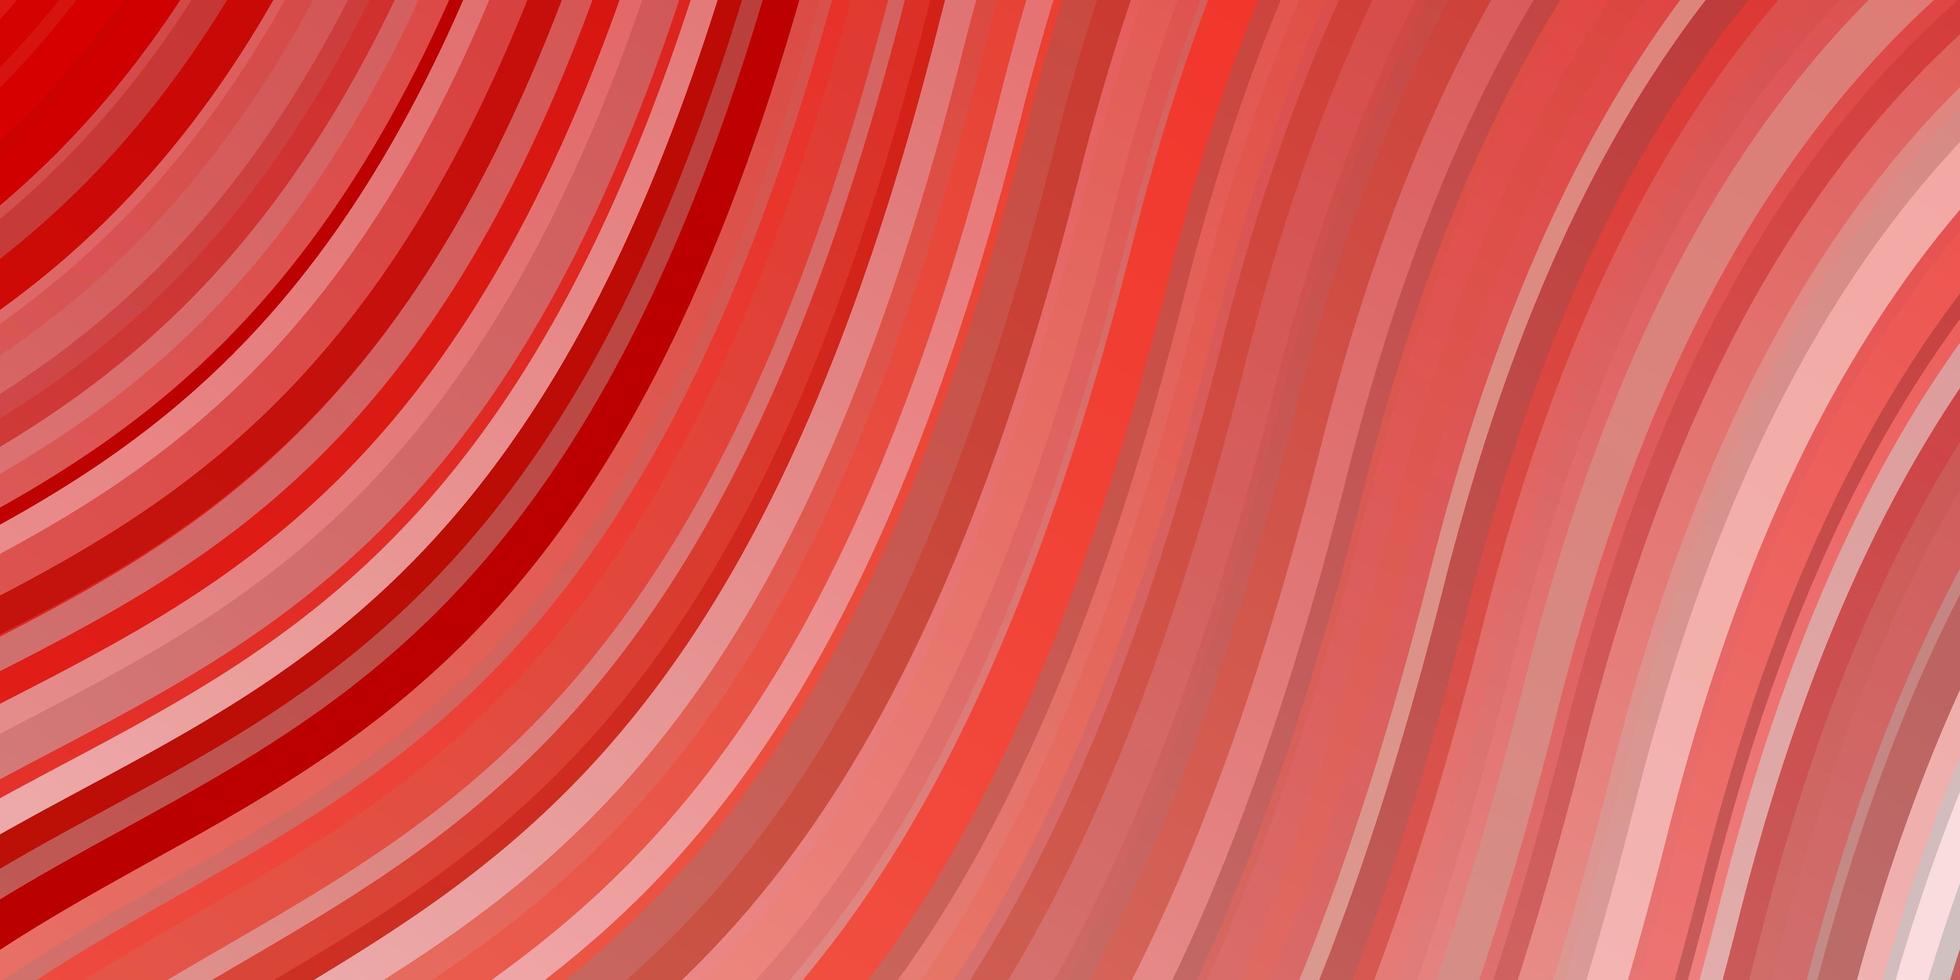 Light Red vector template with curved lines.